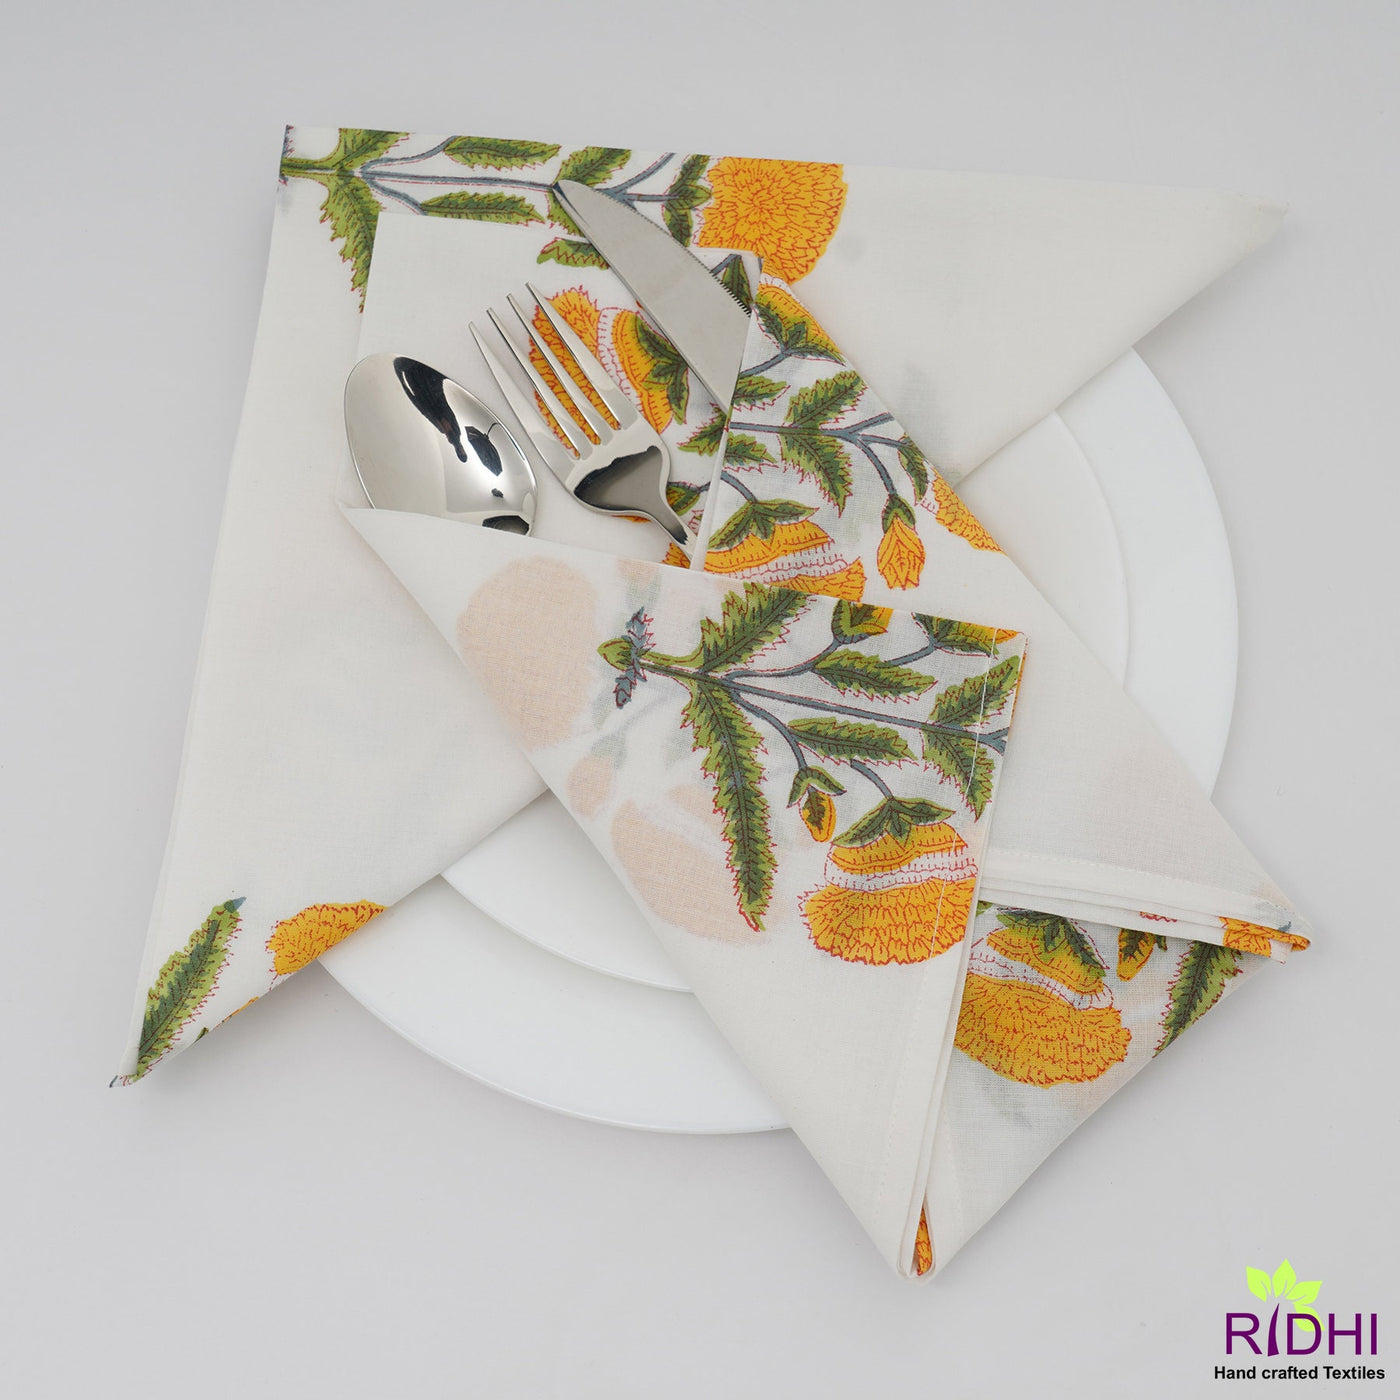 Merigold and Canary Yellow, Kelly and Hunter Green Indian Block Printed Cotton Cloth Napkins, 18x18"-Cocktail Napkin, 20x20"- Dinner Napkins